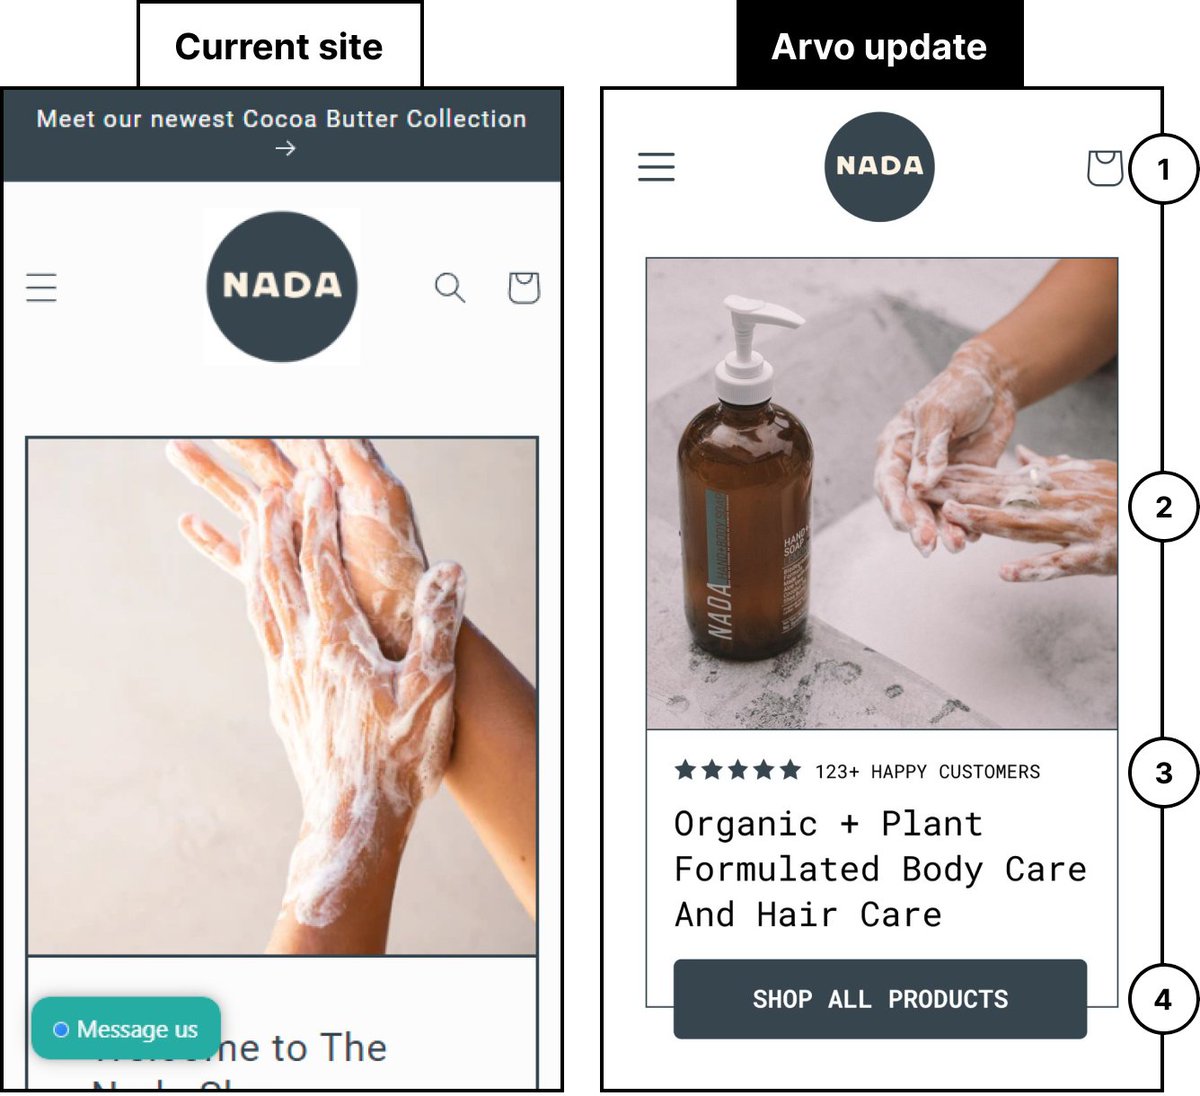 Having a thoughtful product is important today to stand out from the competition and Nada does just that!

As a value add, I isolated 4 quick wins for their website. See the thread for the breakdown!

#conversionrateoptimization #websites #uxdesign #cro #websiteconversion